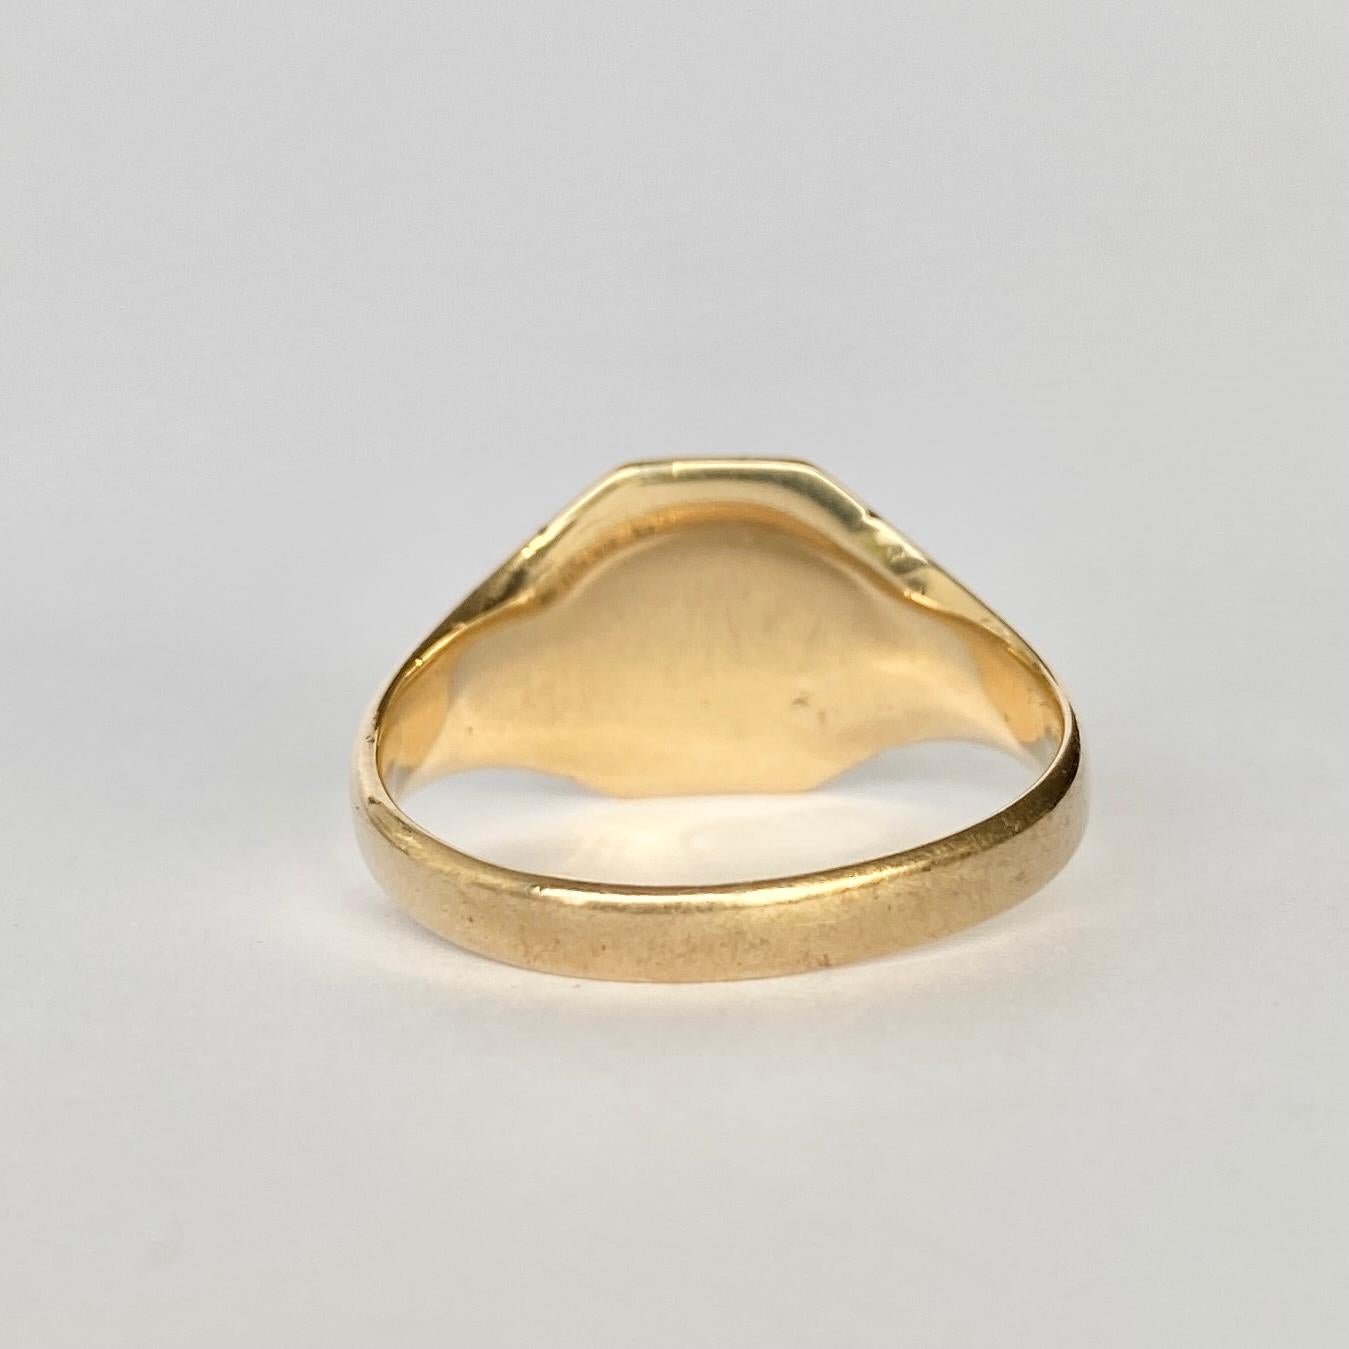 This sweet signet is modelled in 9ct gold and has a face with the initials 'G.M' engraved into it. Fully hallmarked London 1932.

Ring Size: S 1/2 or 9 1/4 
Face Dimensions: 12x13mm 

Weight: 6g